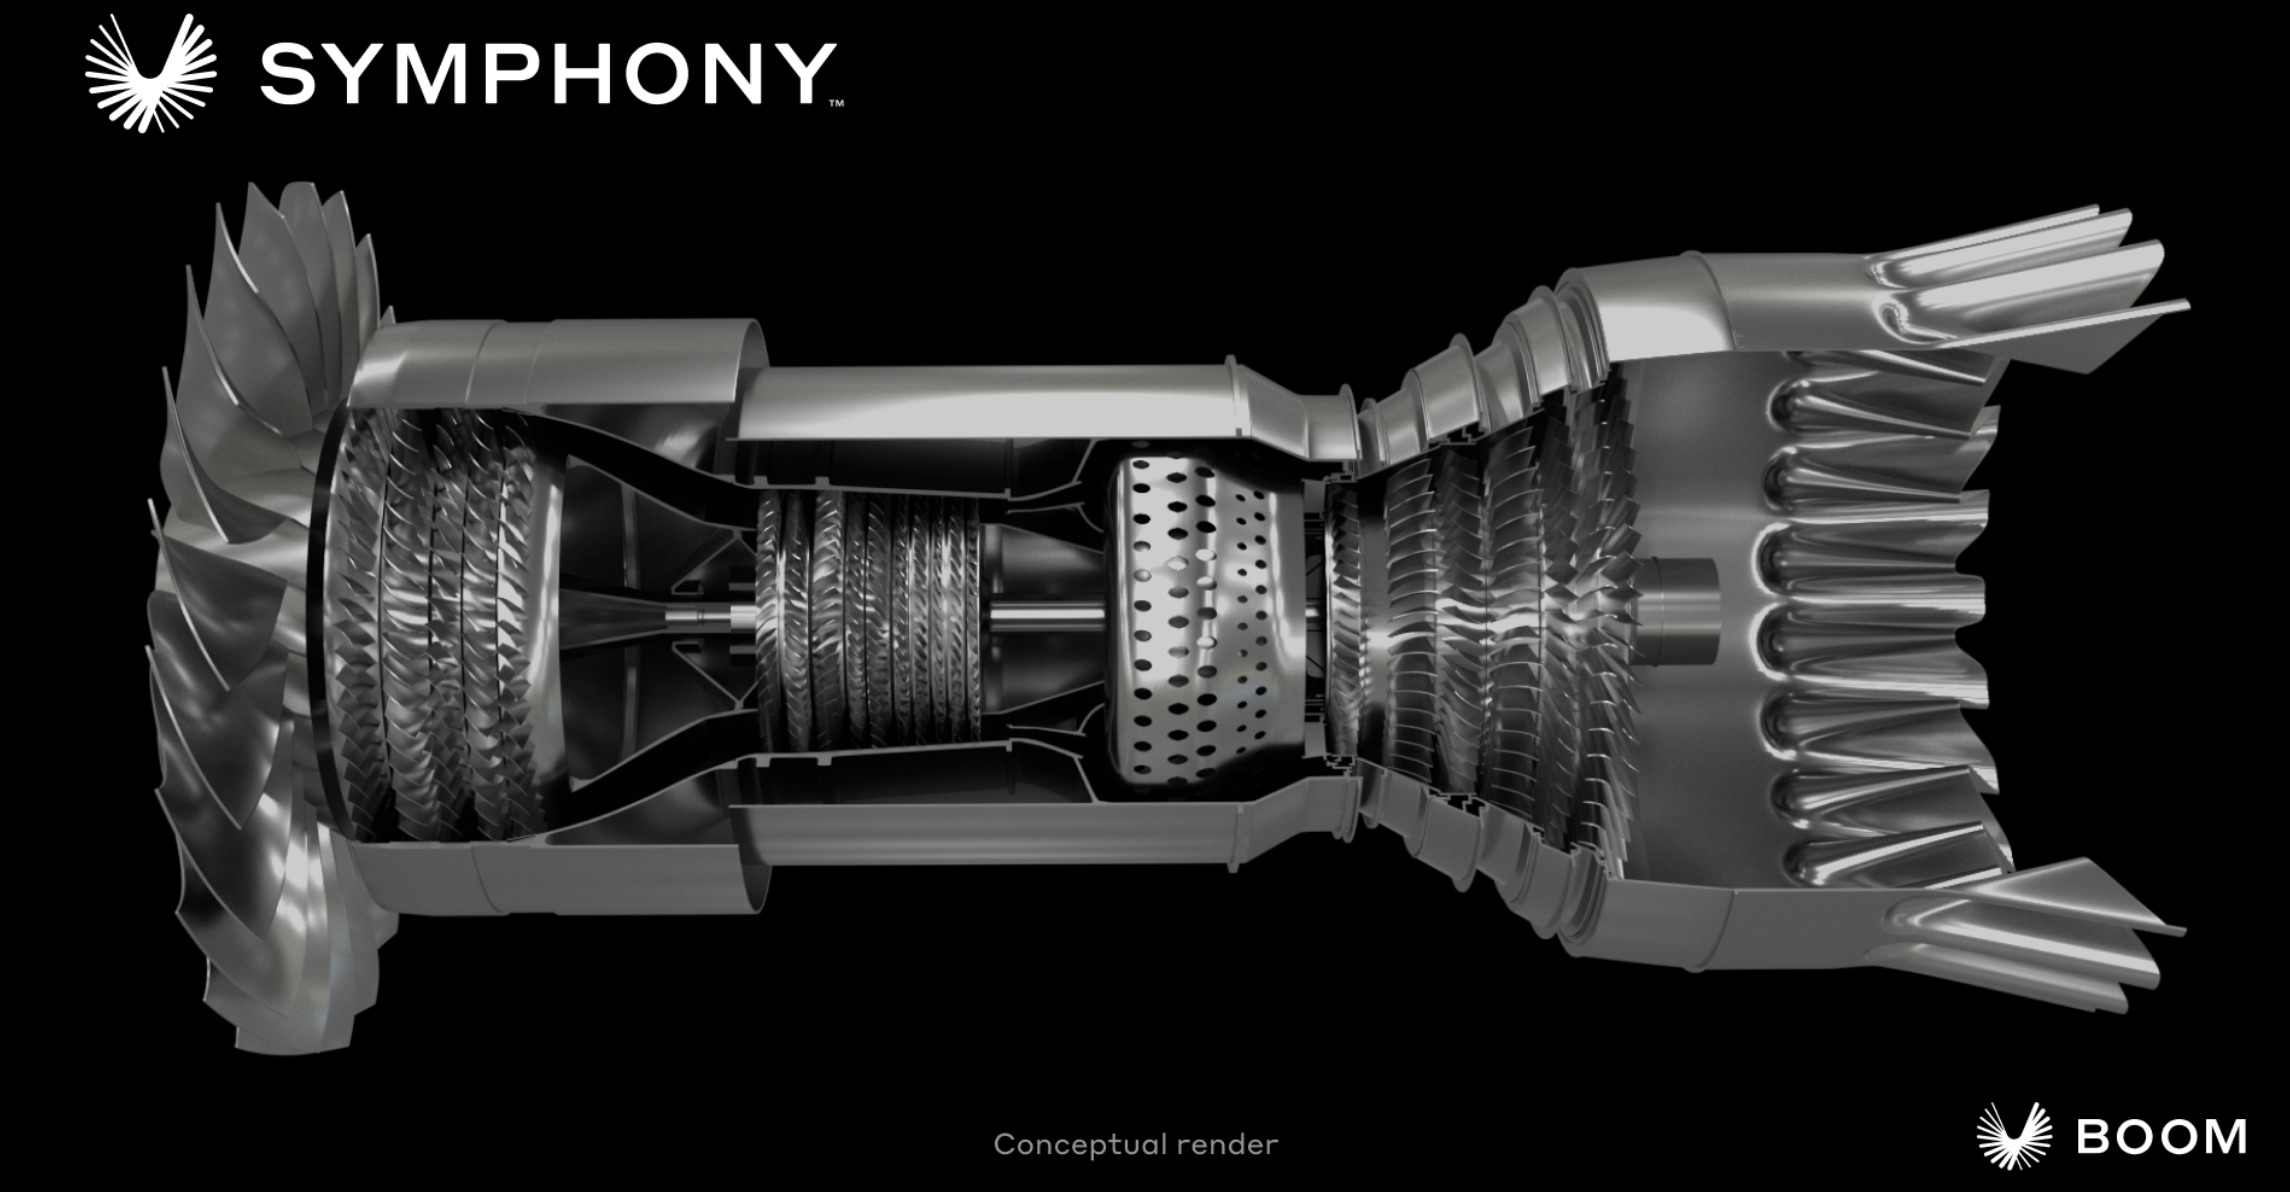 Boom Supersonic cutaway view of the Symphony aircraft engine.